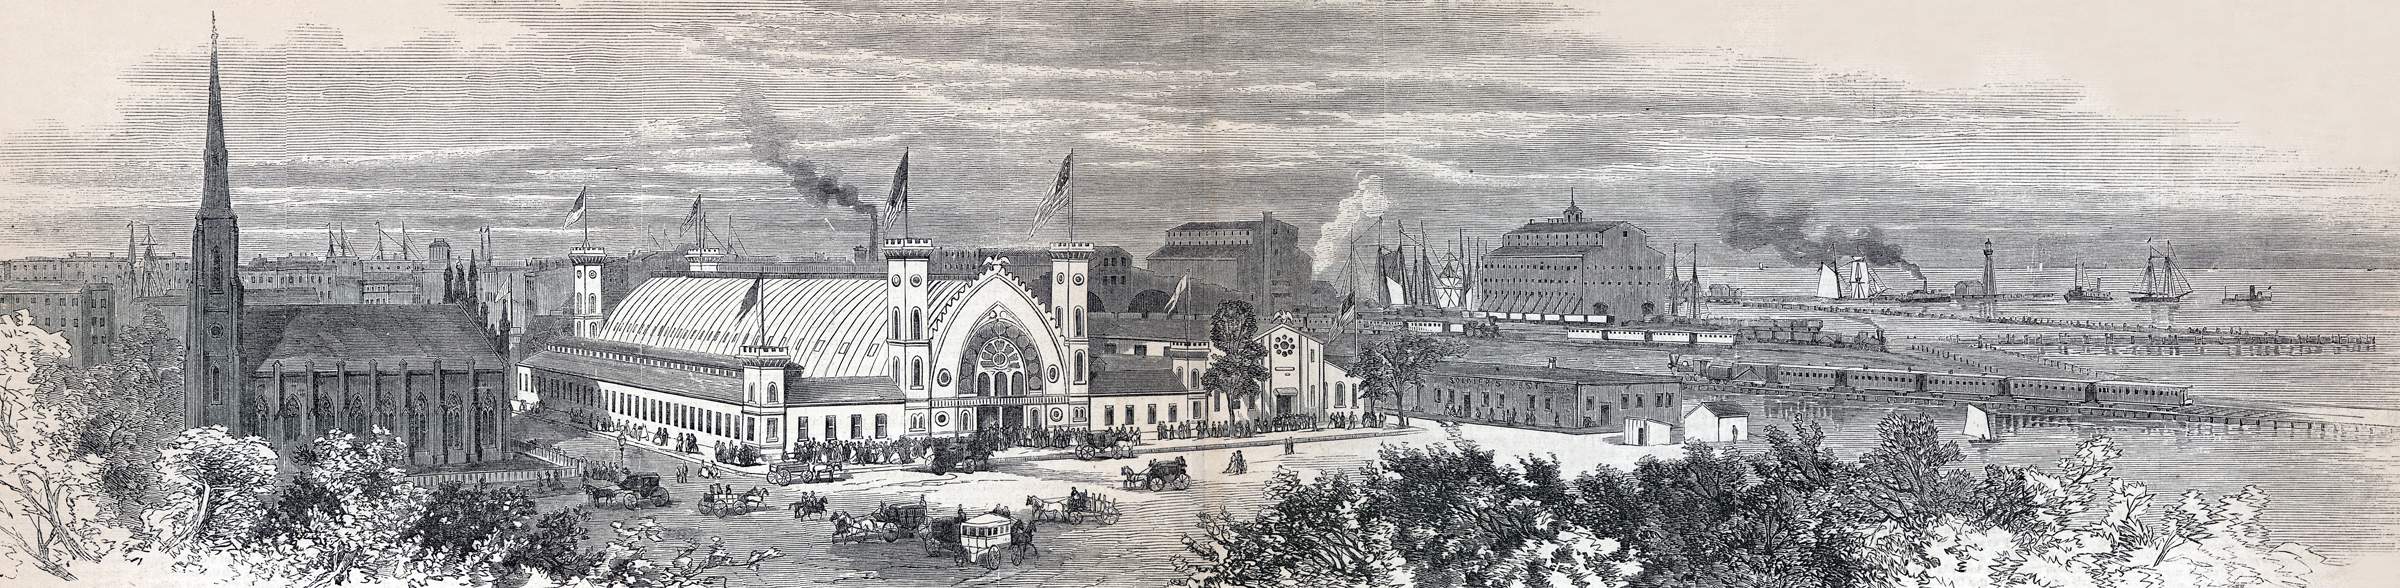 Great North-Western Sanitary Fair, Chicago, Illinois, exterior view, June 1865, artist's impression, zoomable image